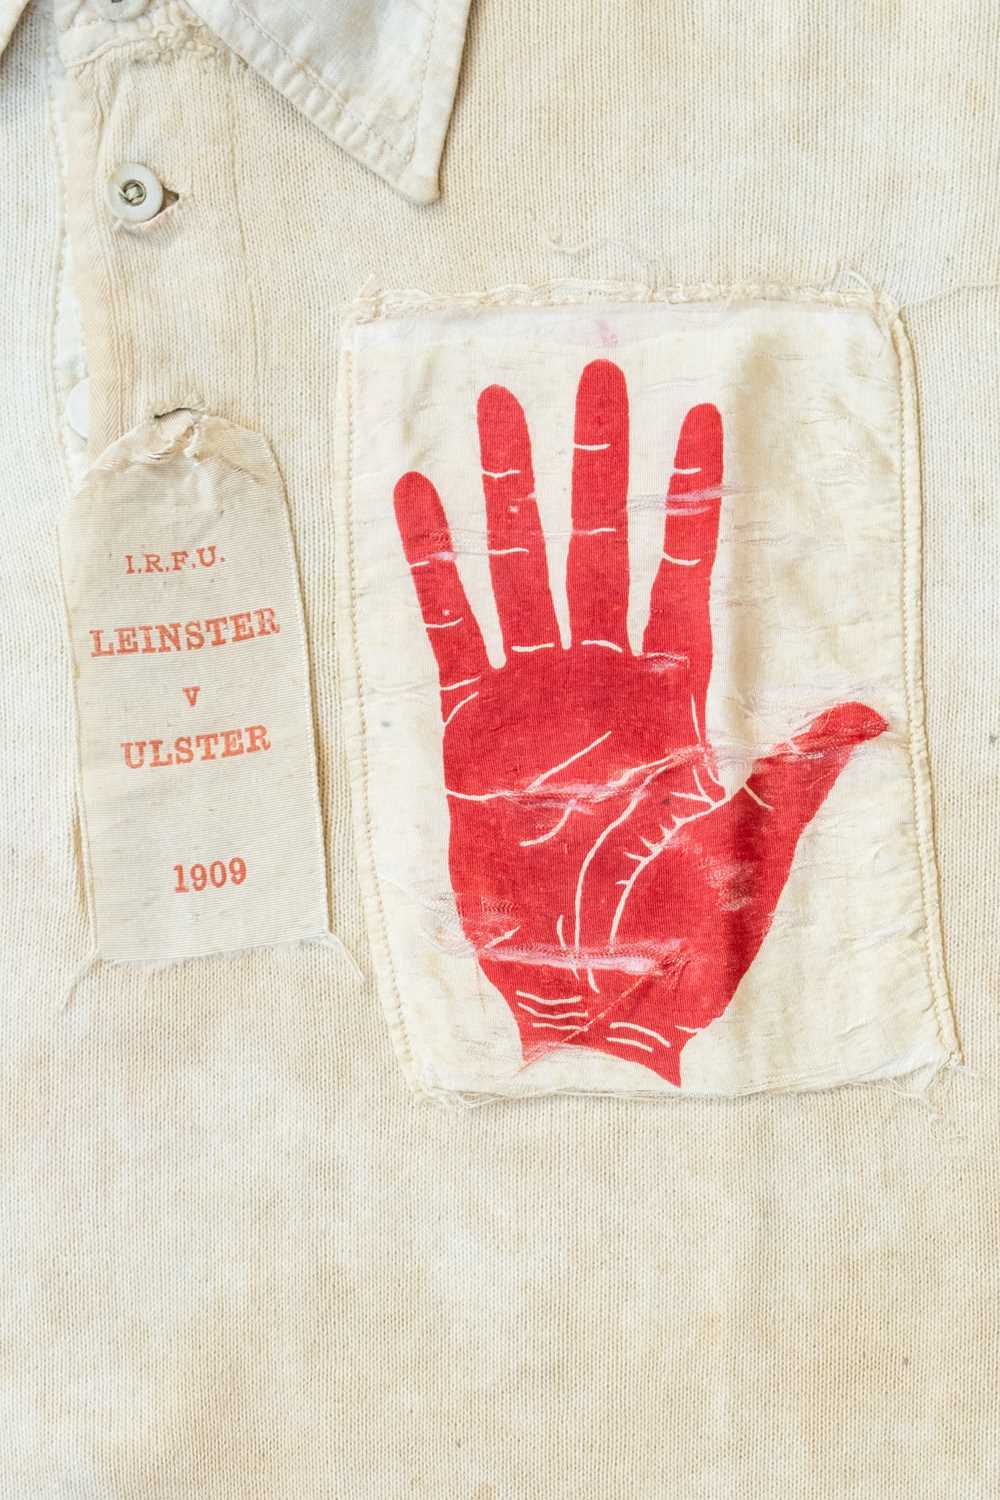 A 1912 ULSTER RUGBY UNION JERSEY MATCH-WORN VERSUS LEINSTER In all white and bearing silk square - Image 4 of 4